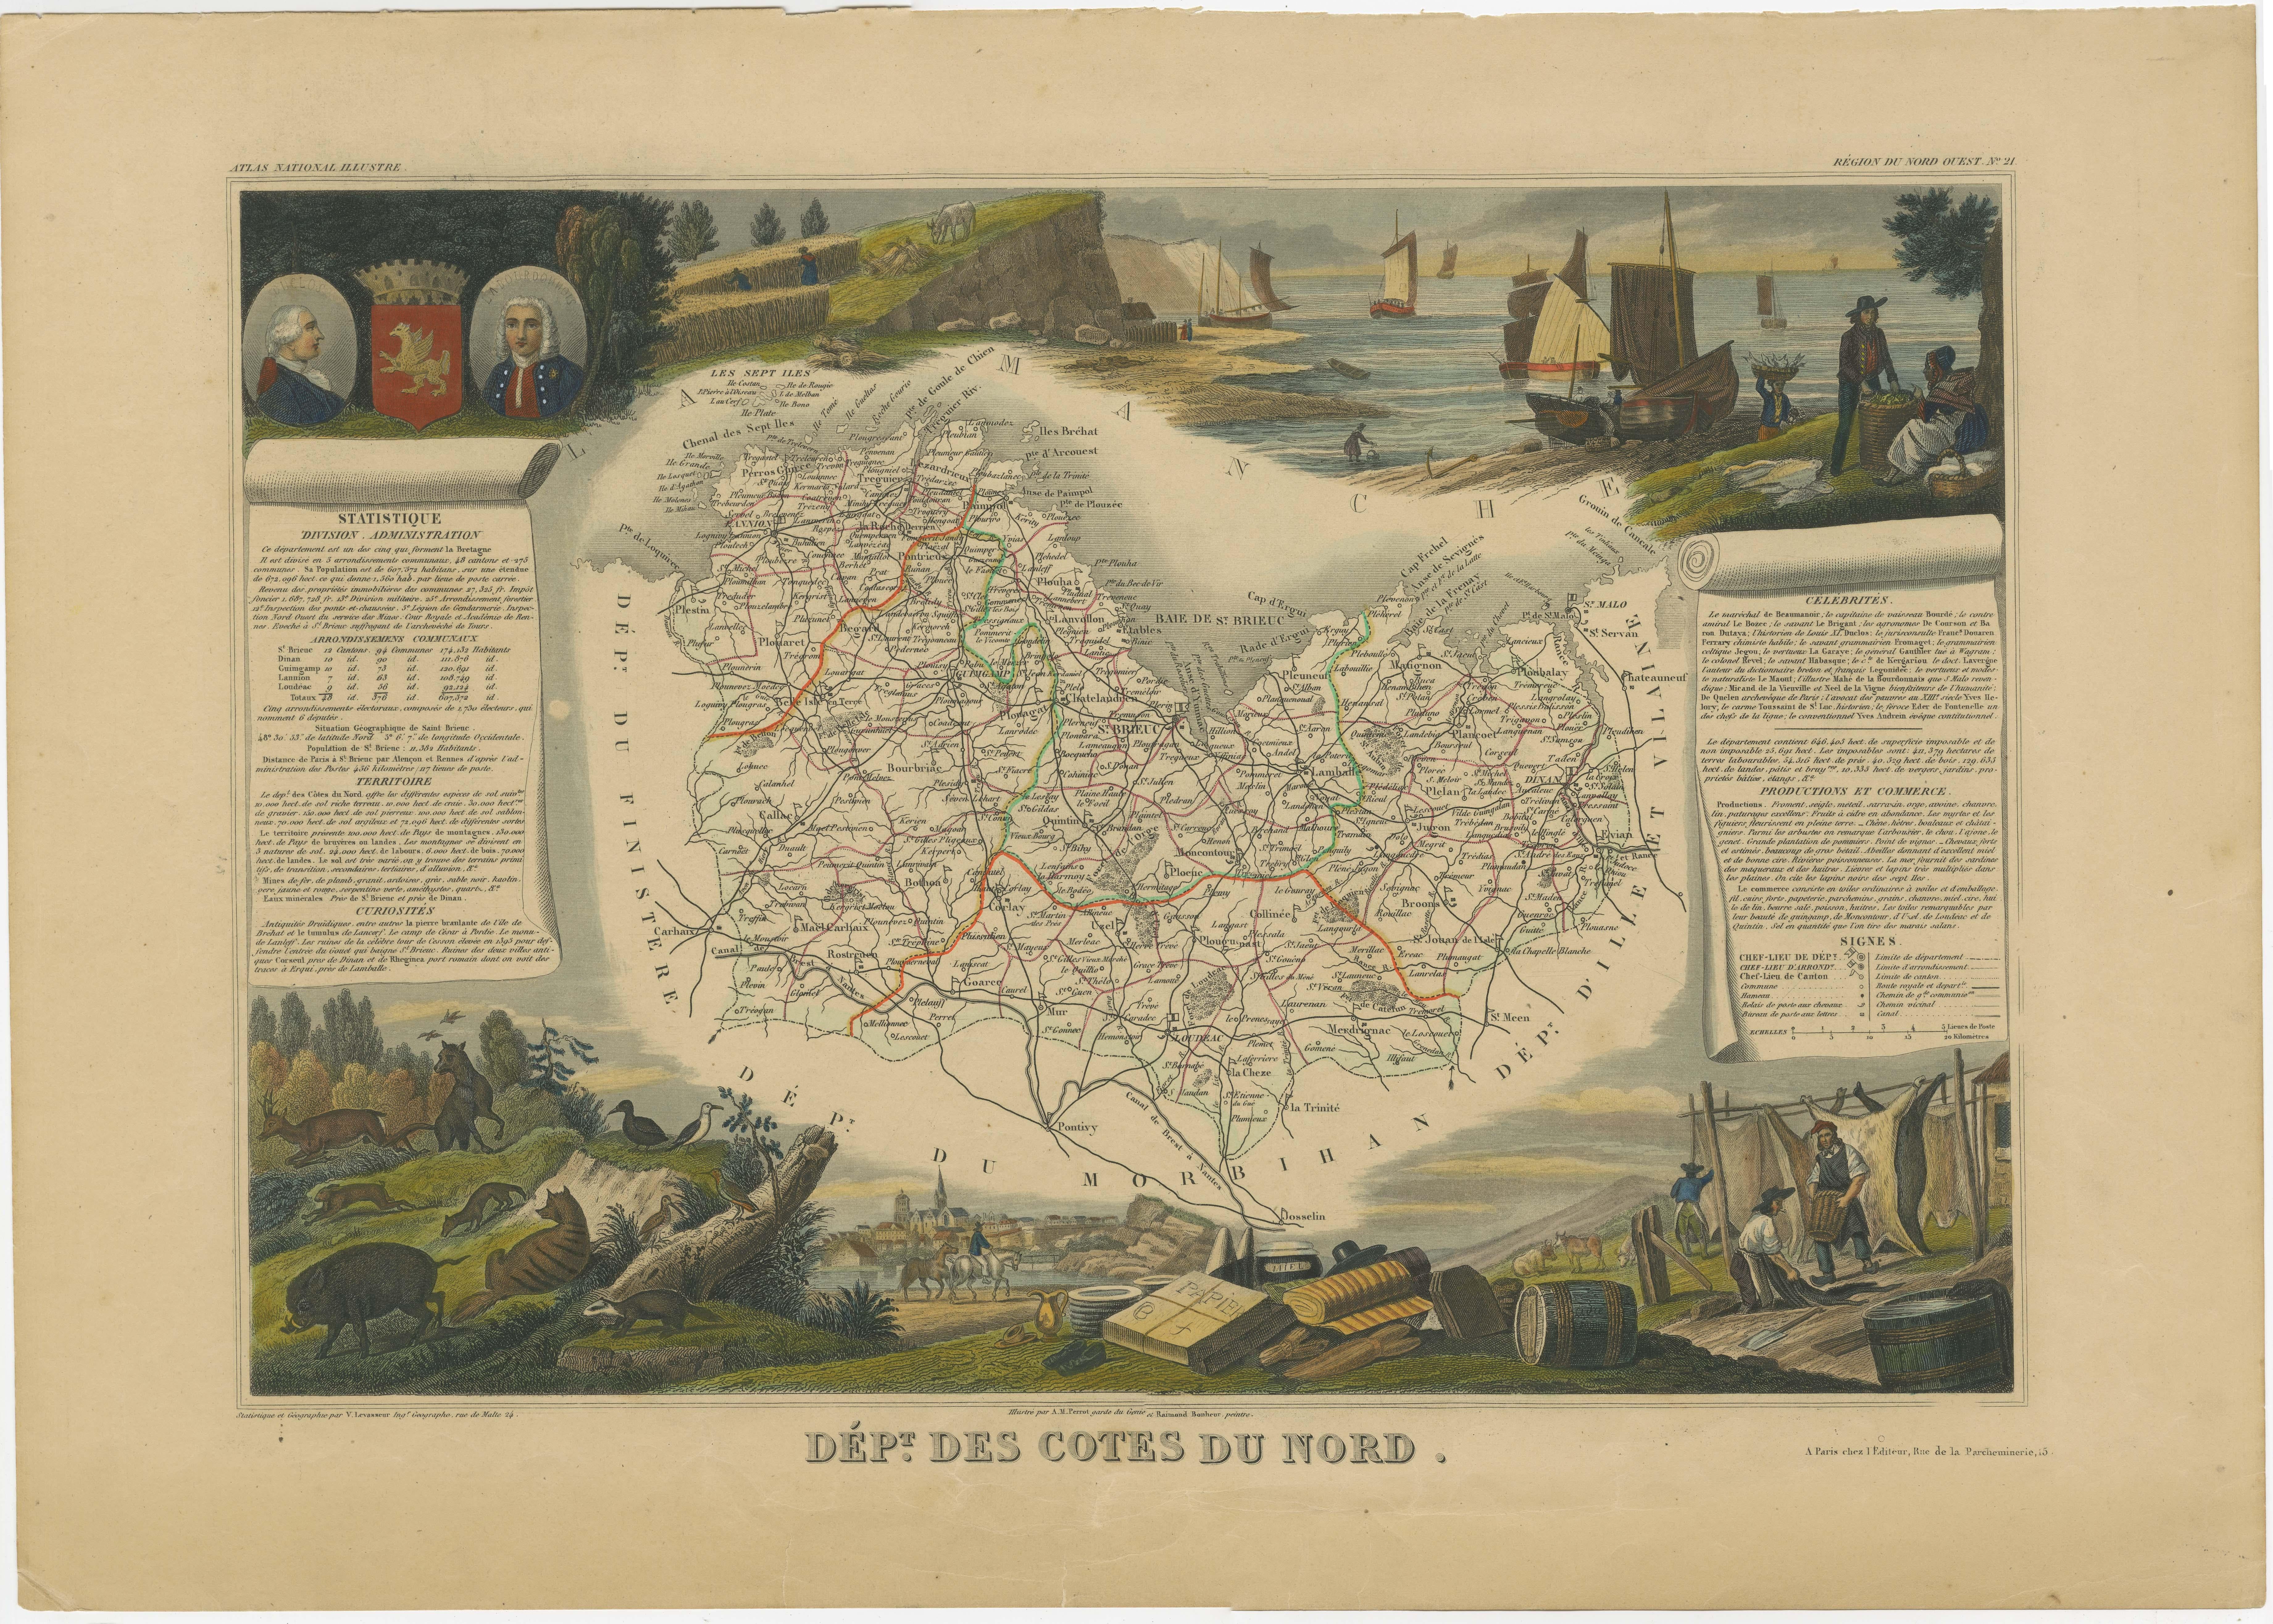 Antique map titled 'Dept. des Cotes du Nord'. Map of the French department of Cotes du Nord, a maritime region in Brittany, France. The whole is surrounded by elaborate decorative engravings designed to illustrate both the natural beauty and trade